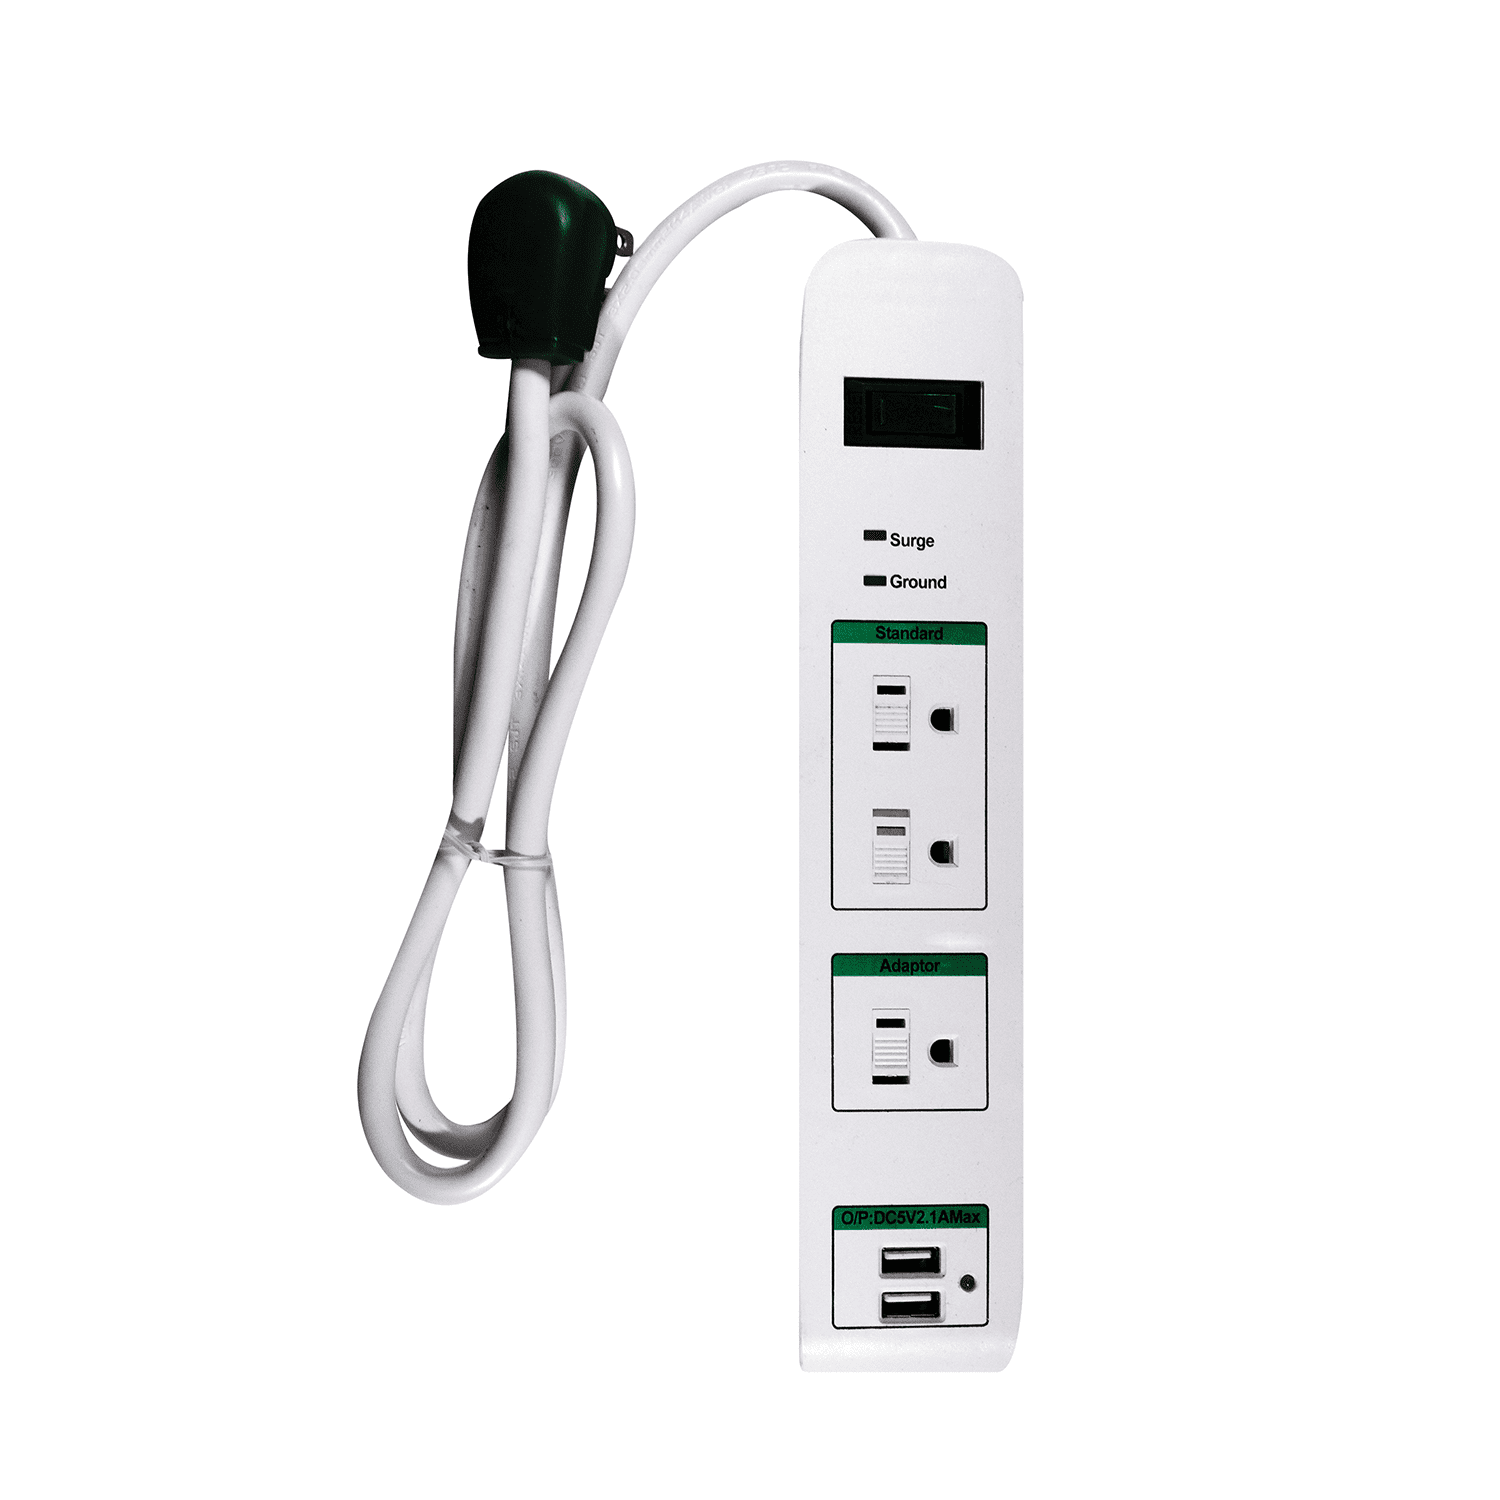 GE UltraPro 1-Outlet Wall Tap with Surge Protection and Audible Alarm White 38124